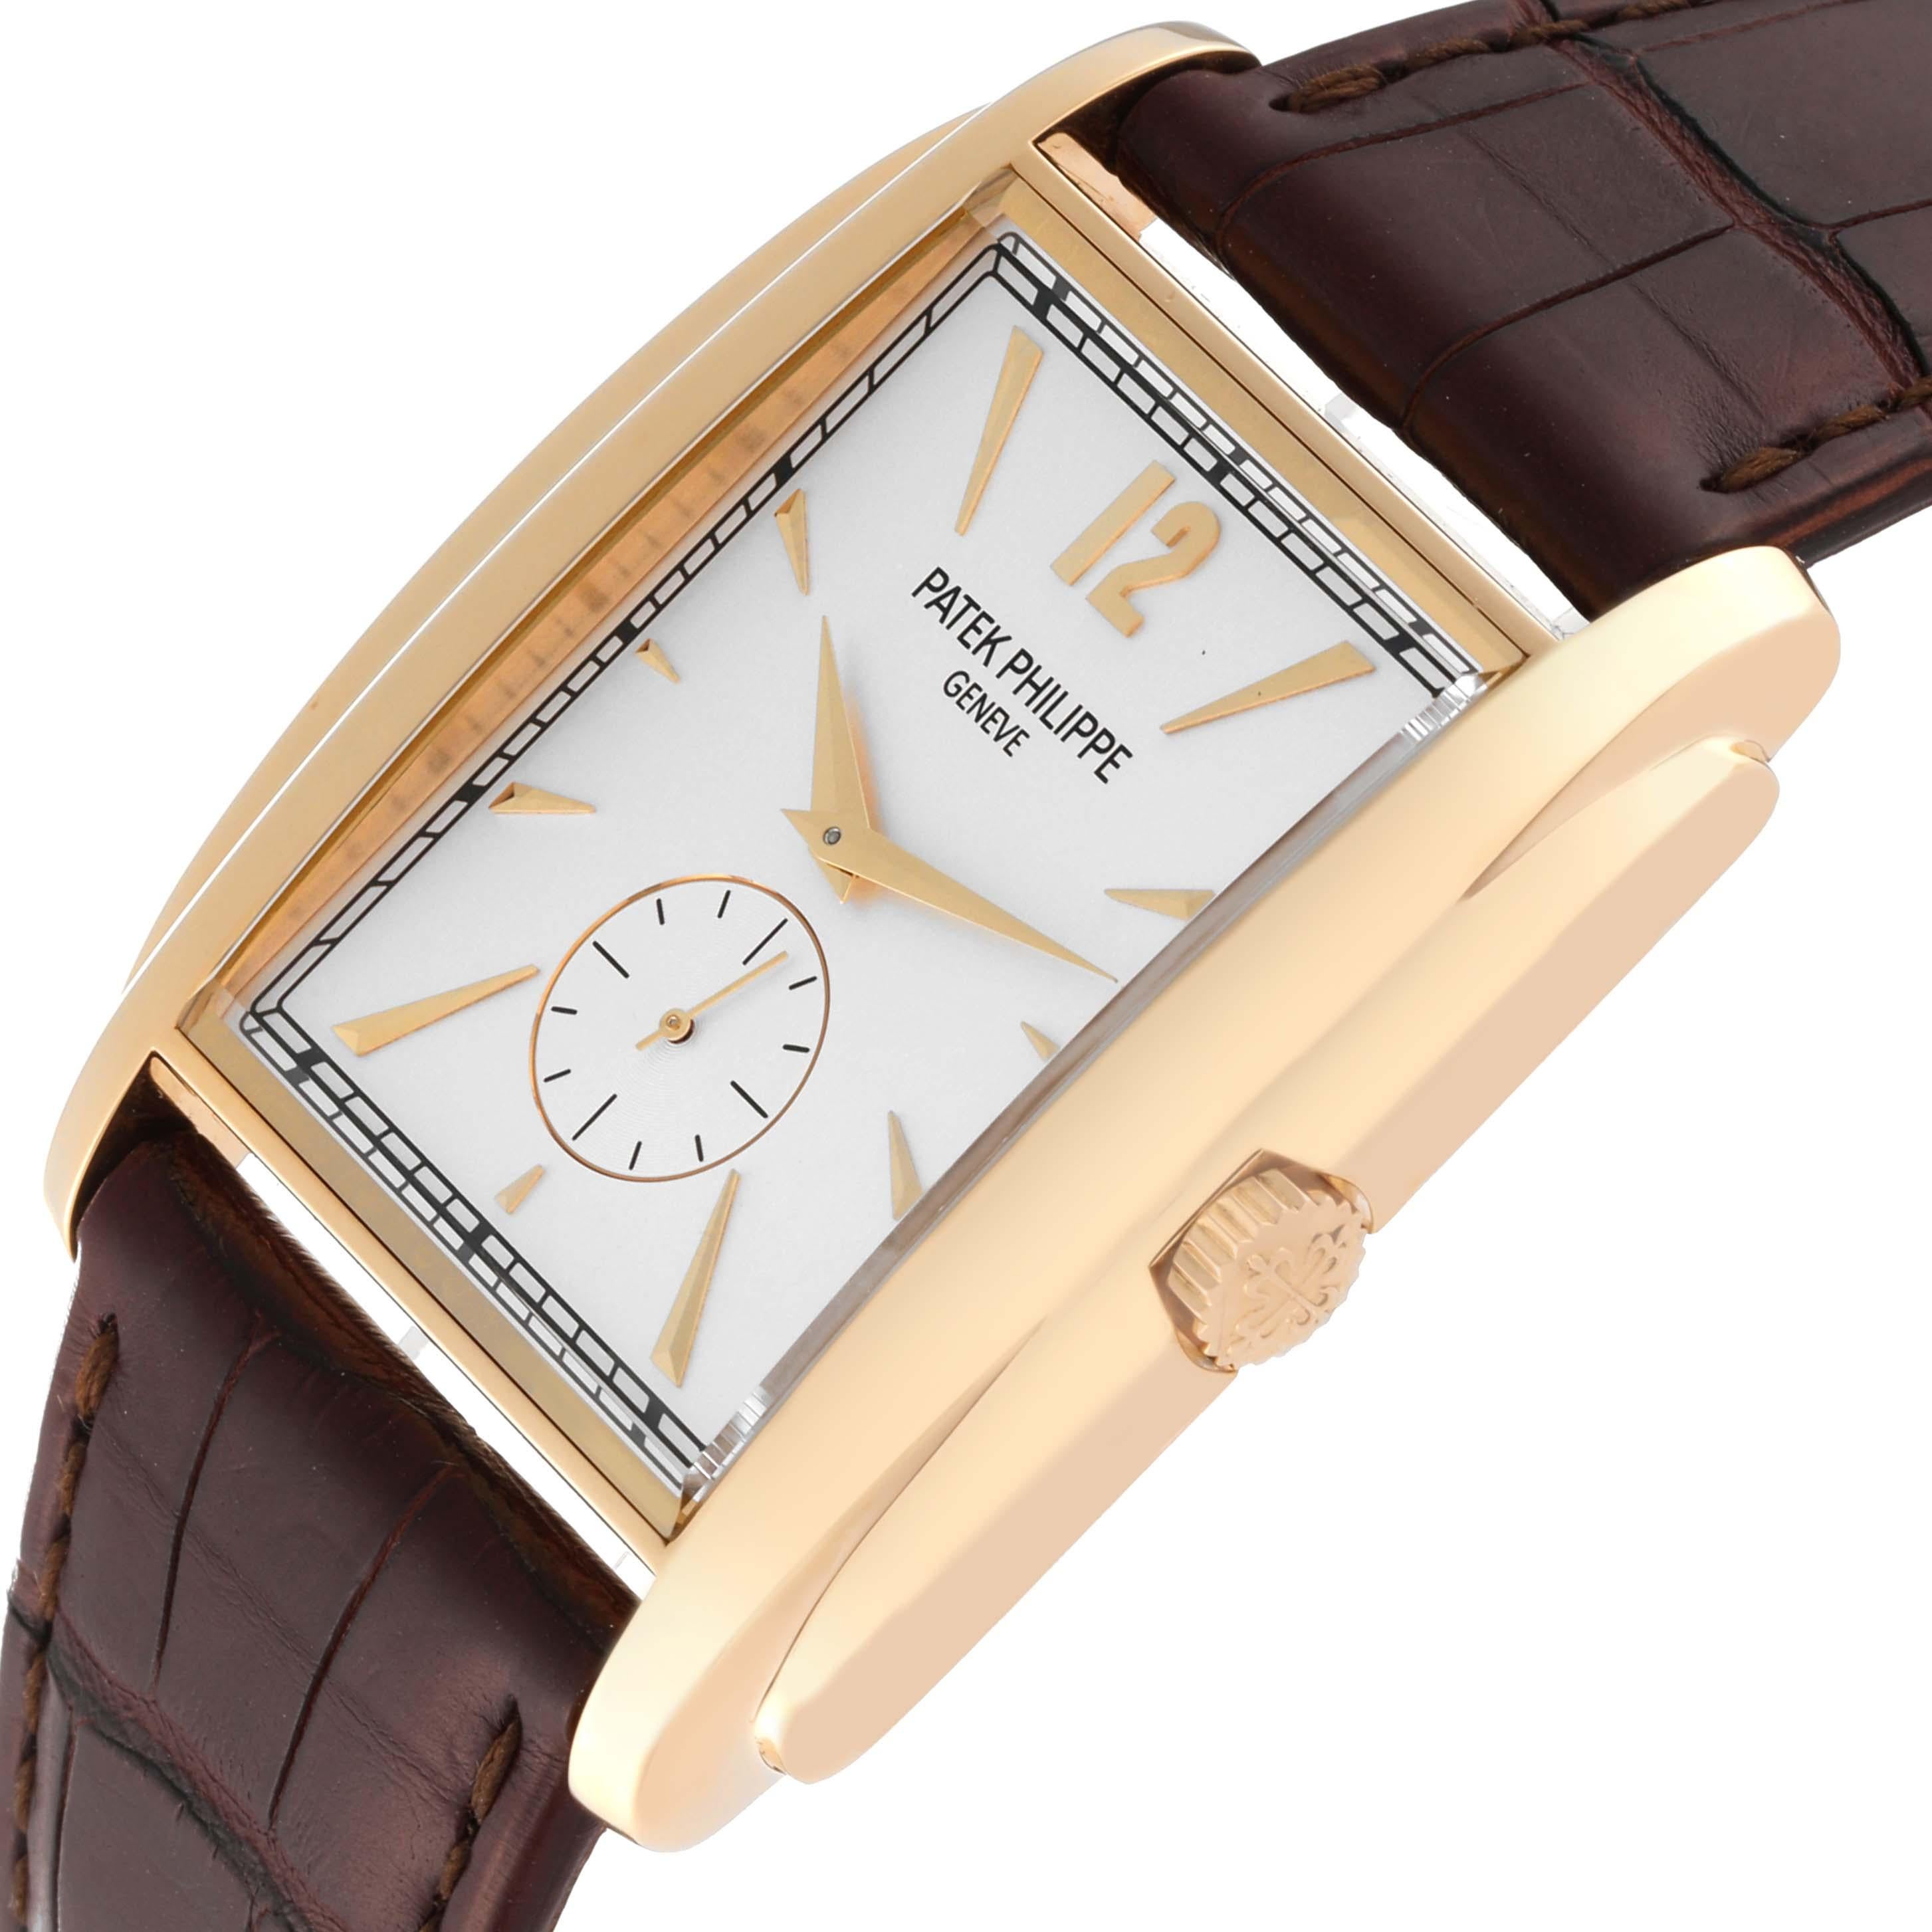 Patek Philippe Gondolo Small Seconds Yellow Gold Silver Dial Mens Watch 5124. Manual winding movement. 18K yellow gold rectangular case 43 mm x 33.4 mm. . Scratch resistant sapphire crystal. Silver dial with raised yellow gold baton hour markers and